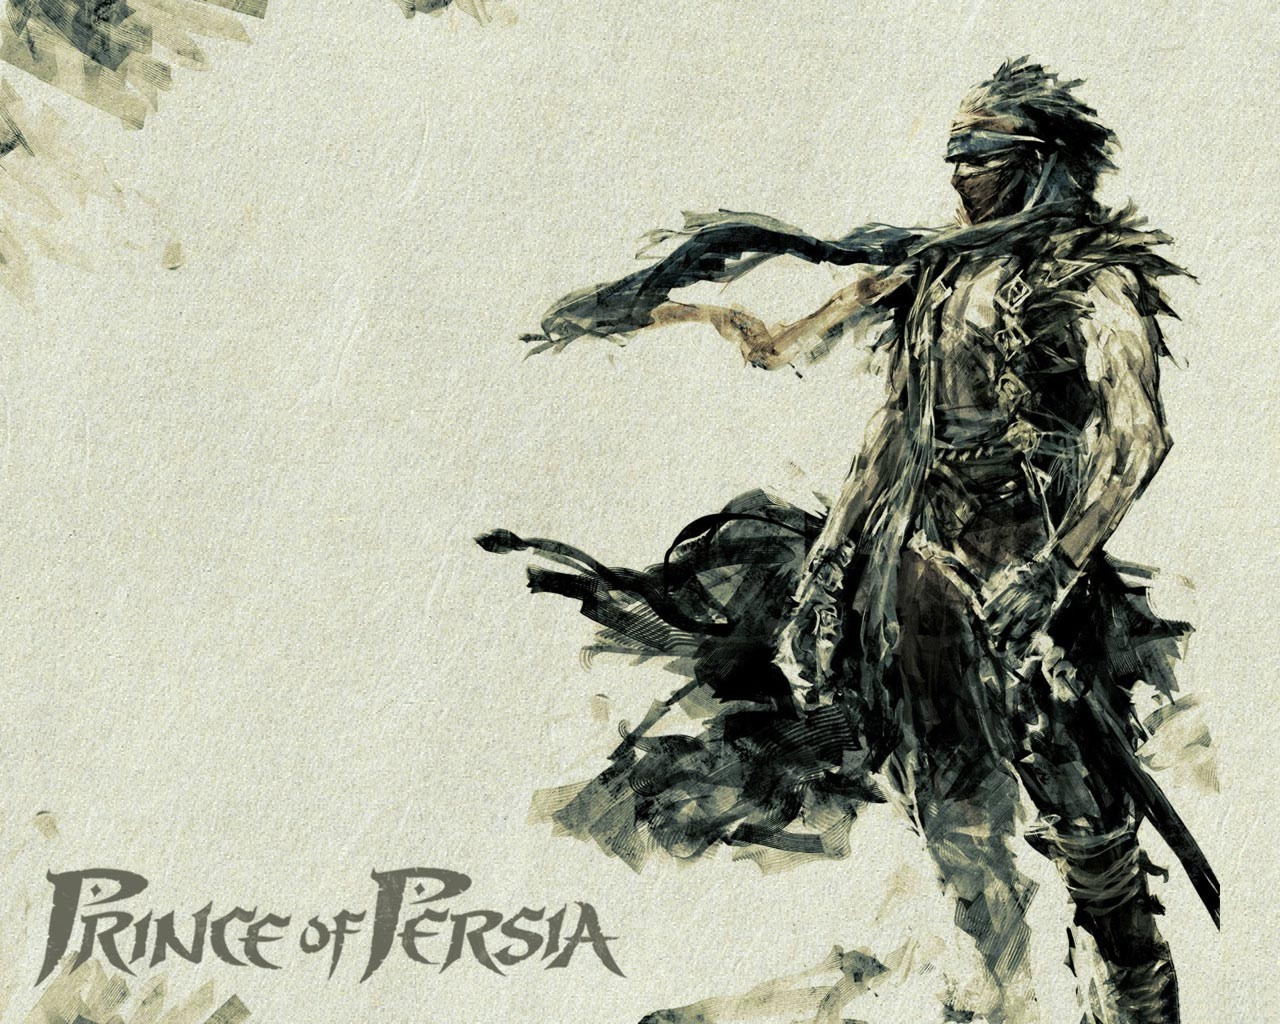 Download HQ Prince of Persia wallpaper / Games / 1280x1024